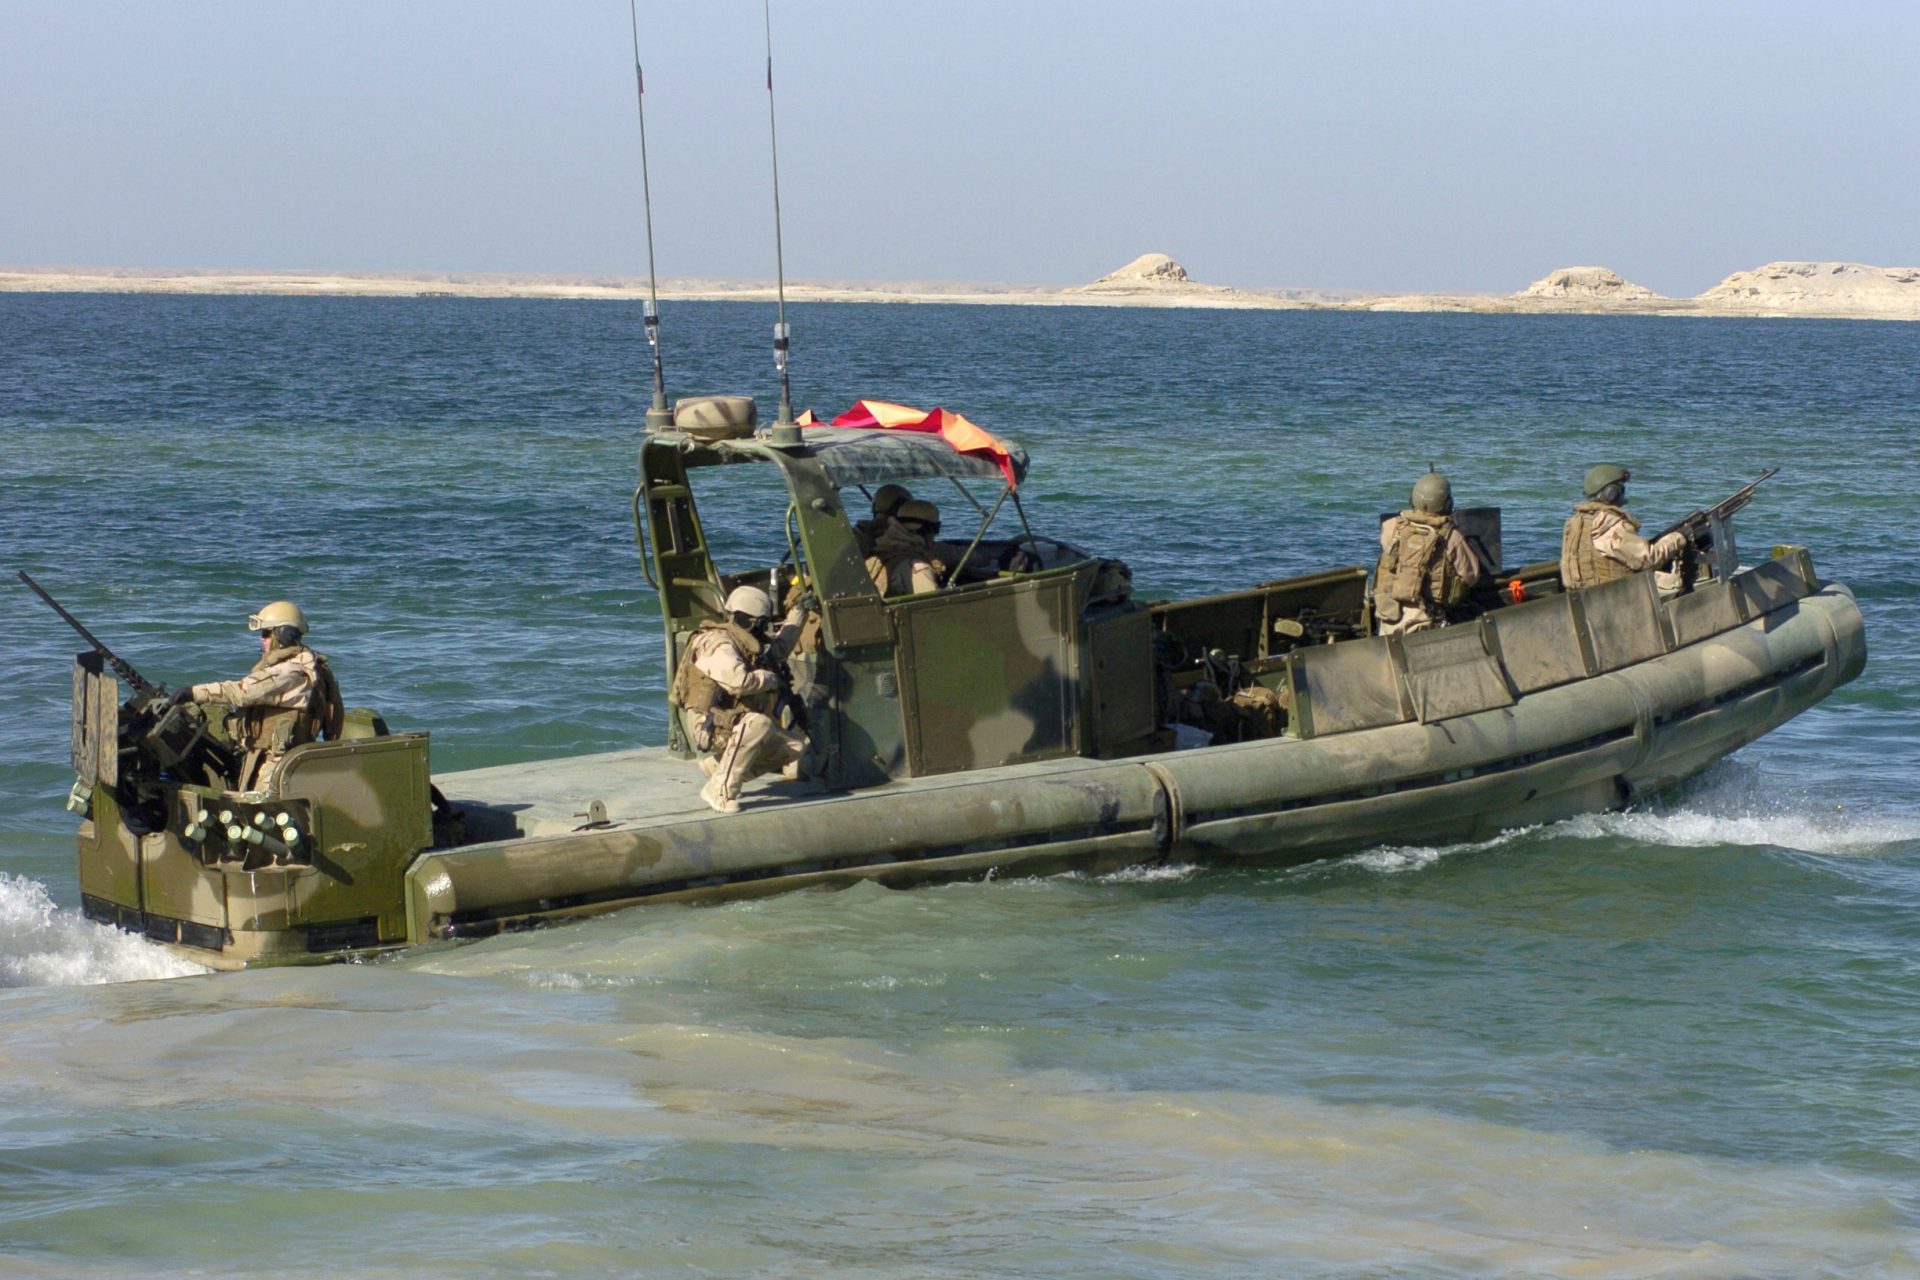 A few patrol boats we know about already 